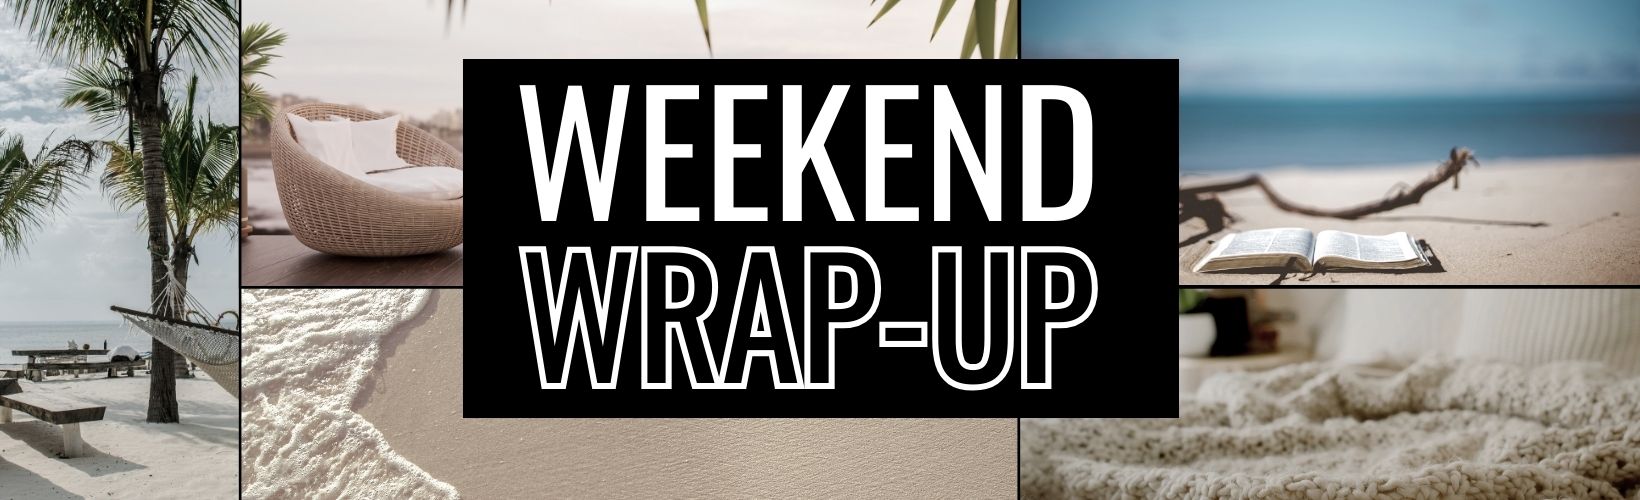 Weekend Wrap-Up: How to Prepare for Thanksgiving Like a Pro